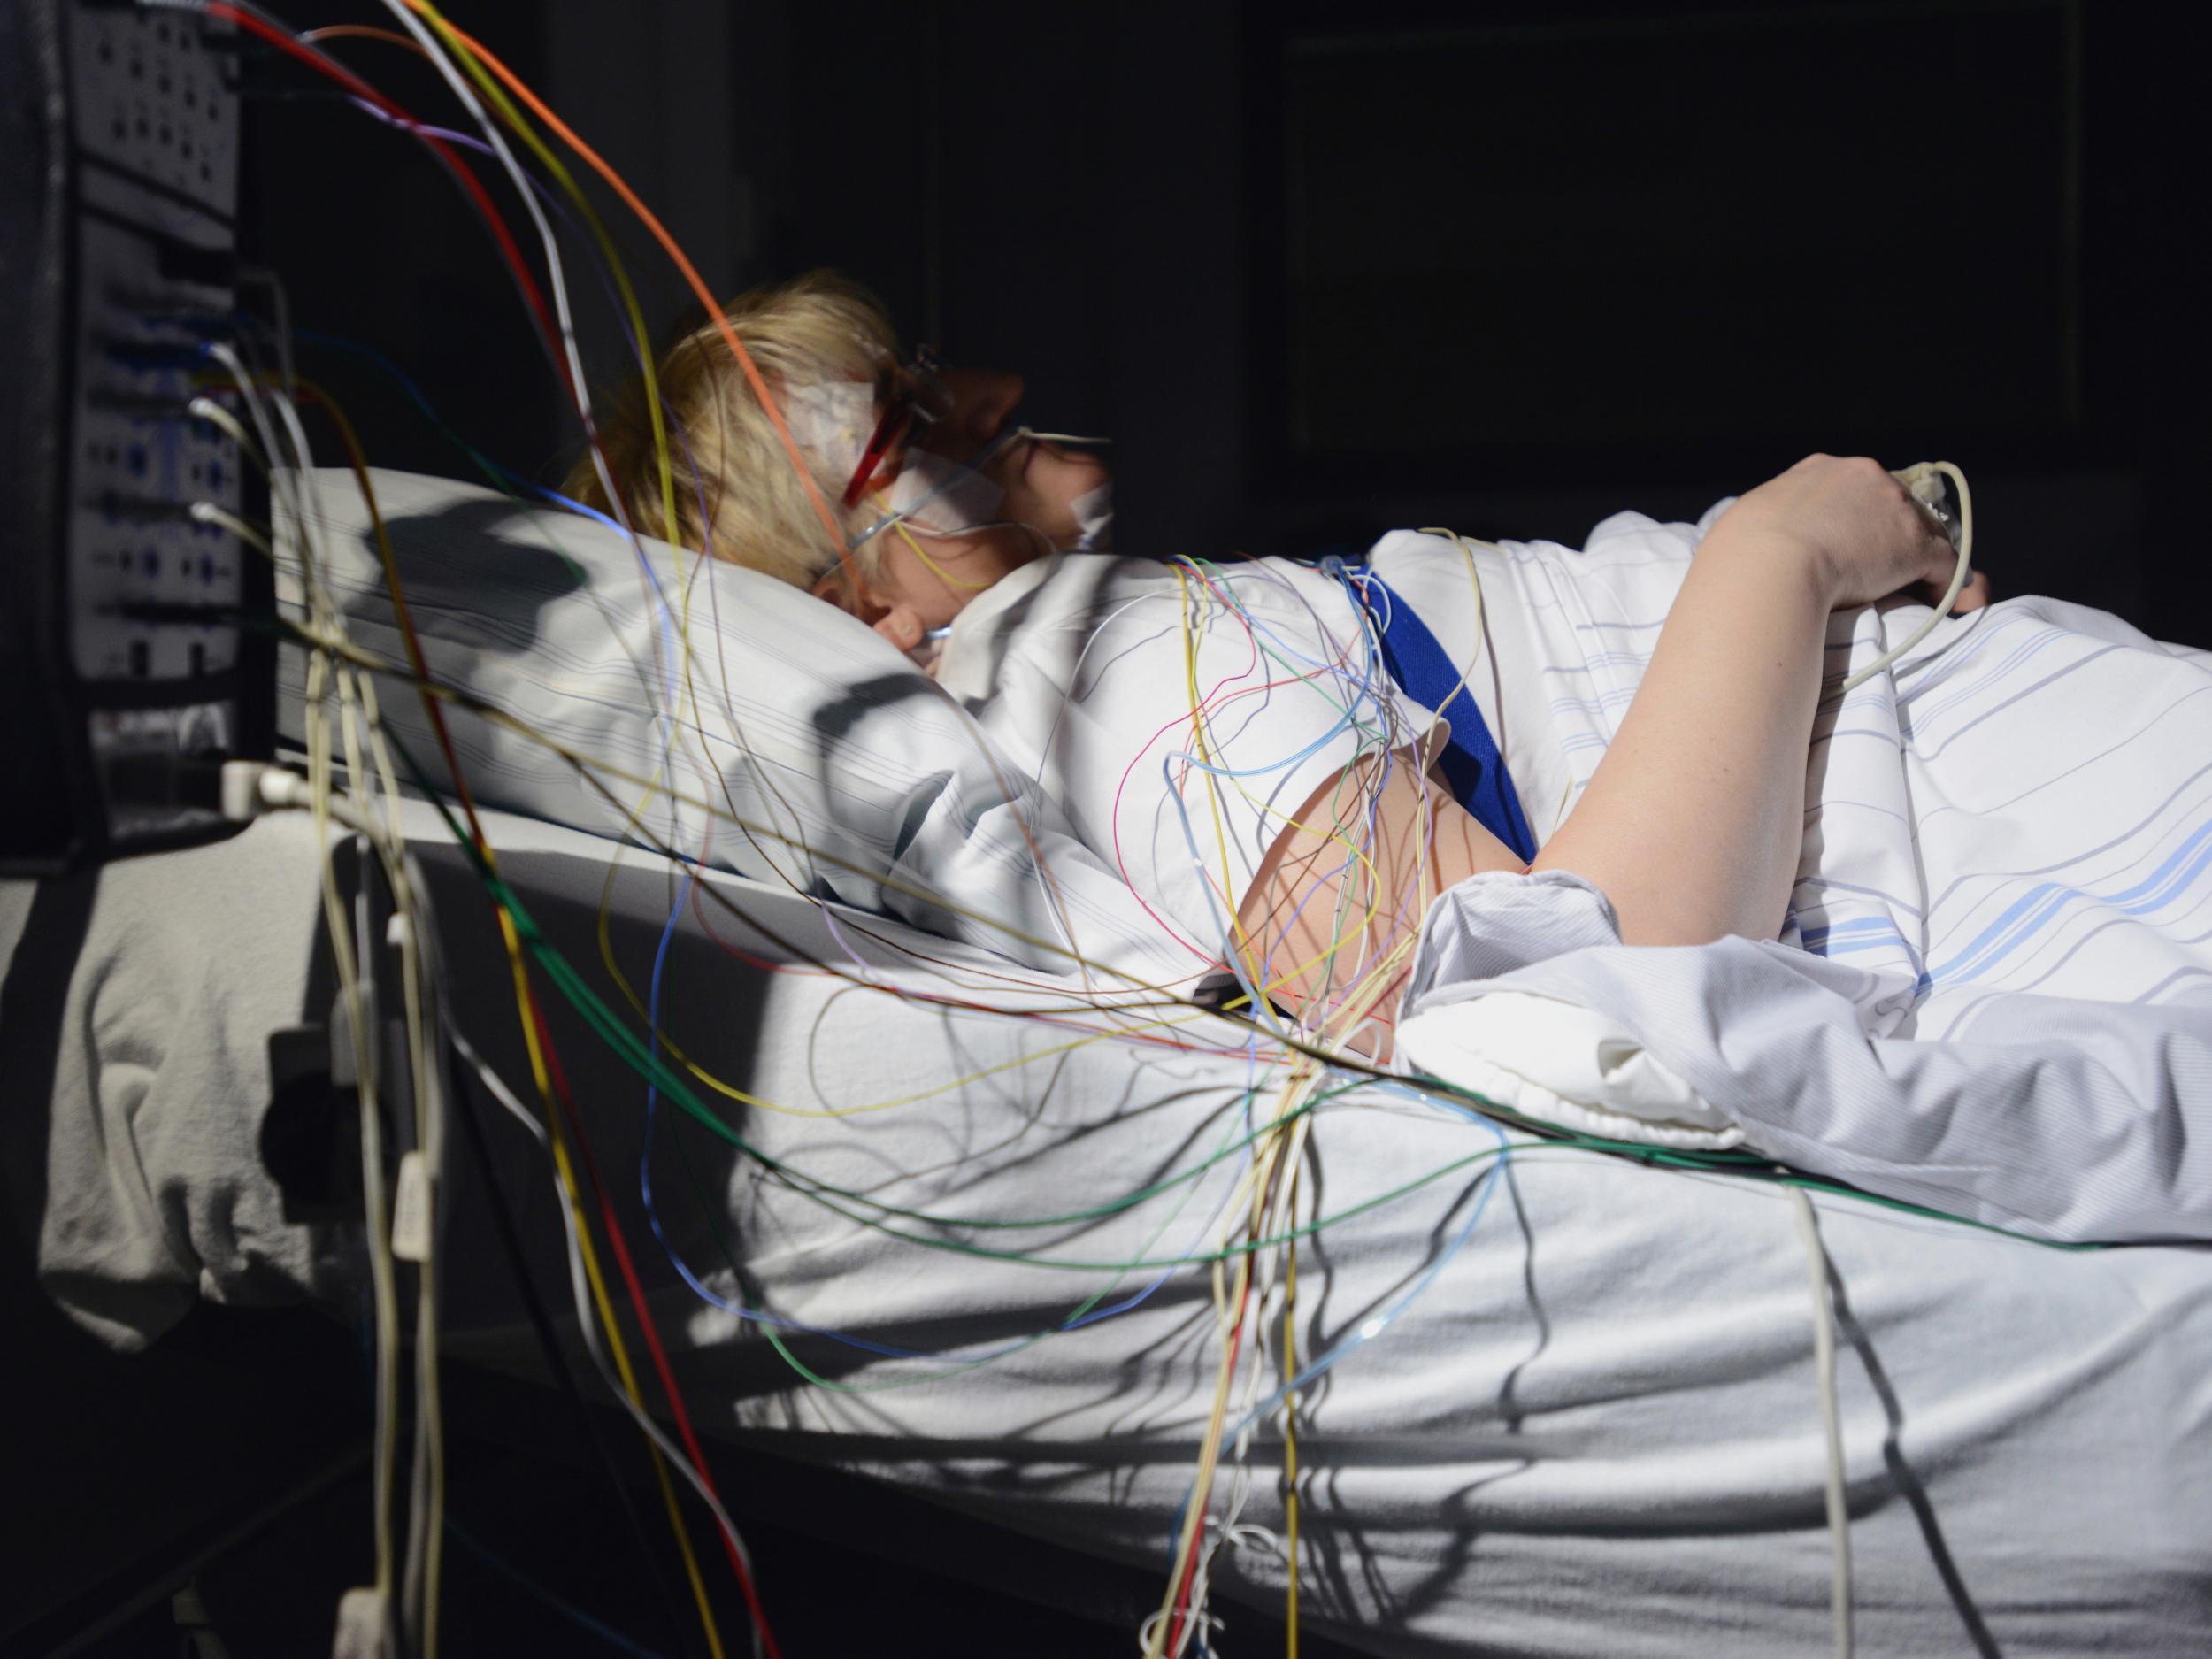 Clinical sleep evaluation can involve being monitored for a full night with more than 20 sensors recording breathing, brain activity and heart activity